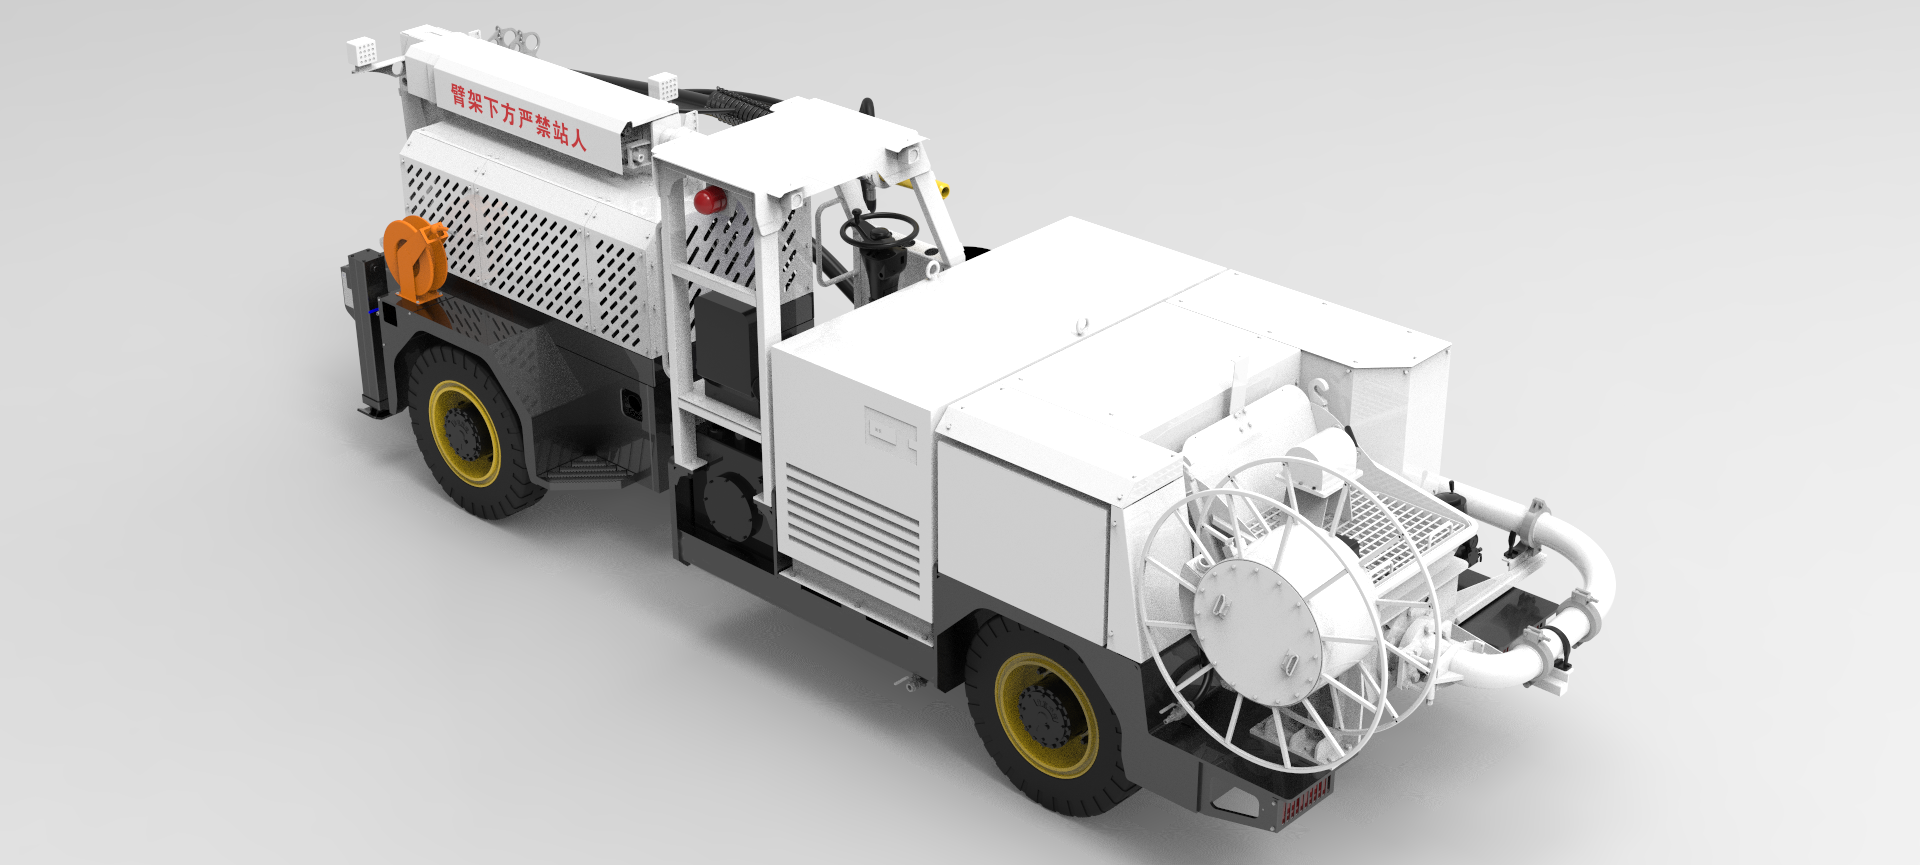 wet-mix-concrete-sprayer-GH1809G-K2-by-HOT-Mining-1 (1).png